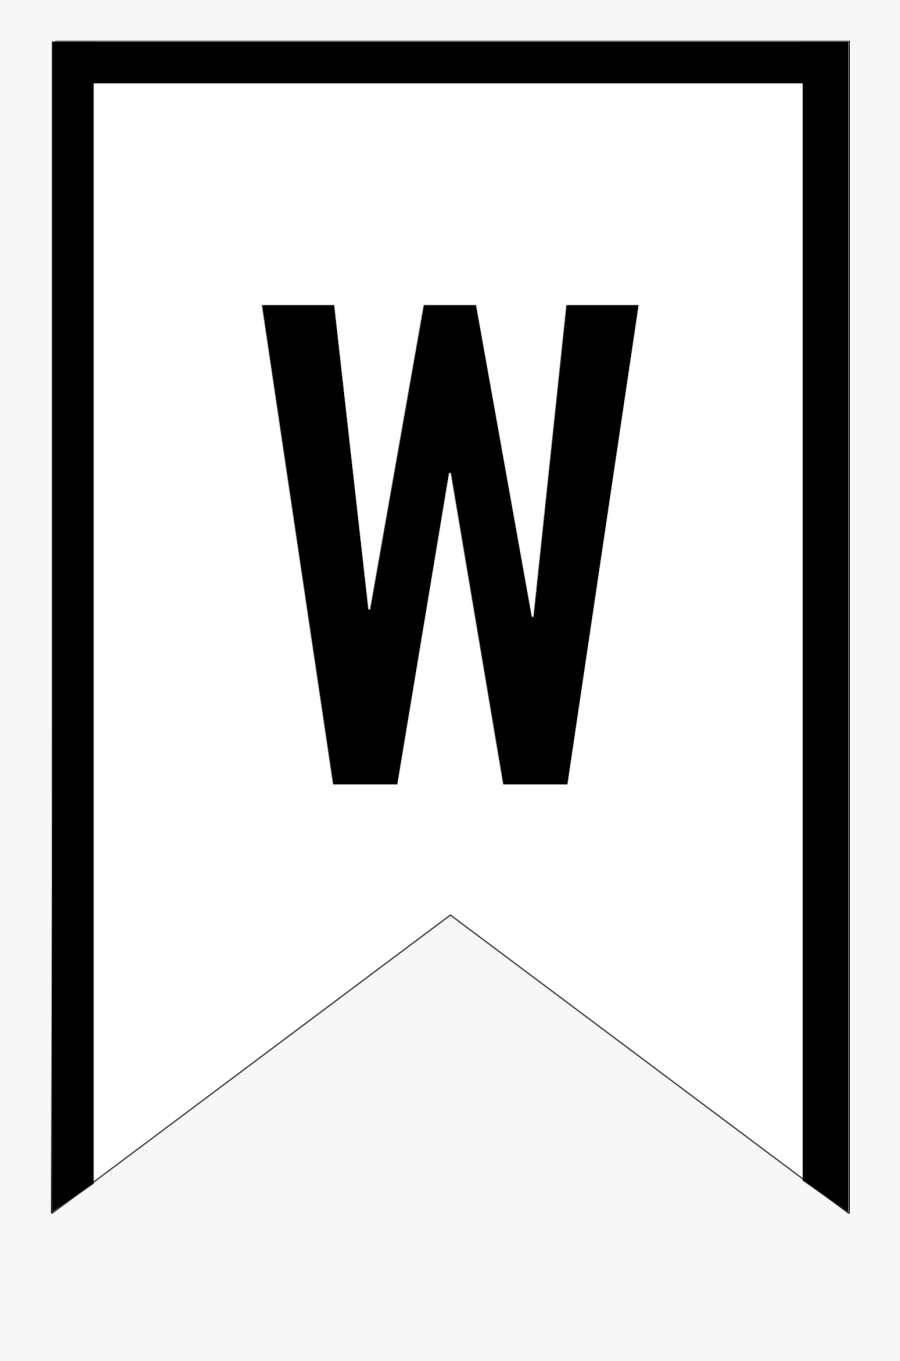 For Best Results, Download The Image To Your Computer - Letter, Transparent Clipart